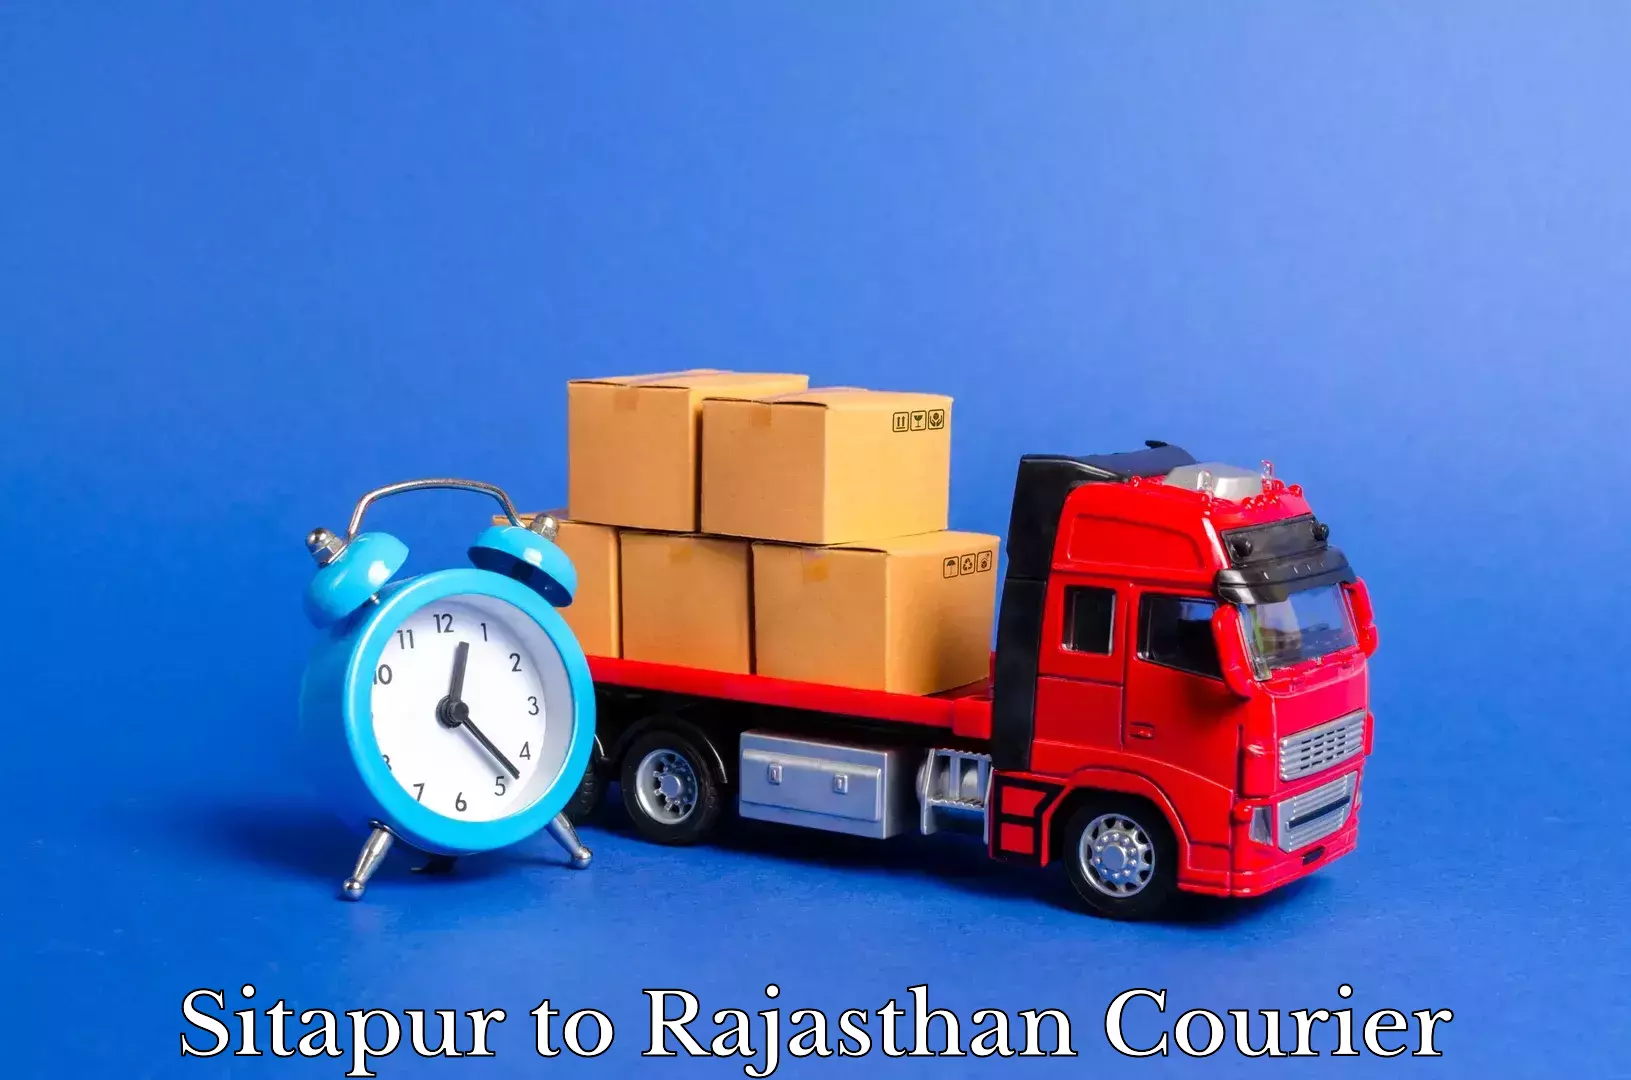 Budget-friendly moving services Sitapur to Bhiwadi